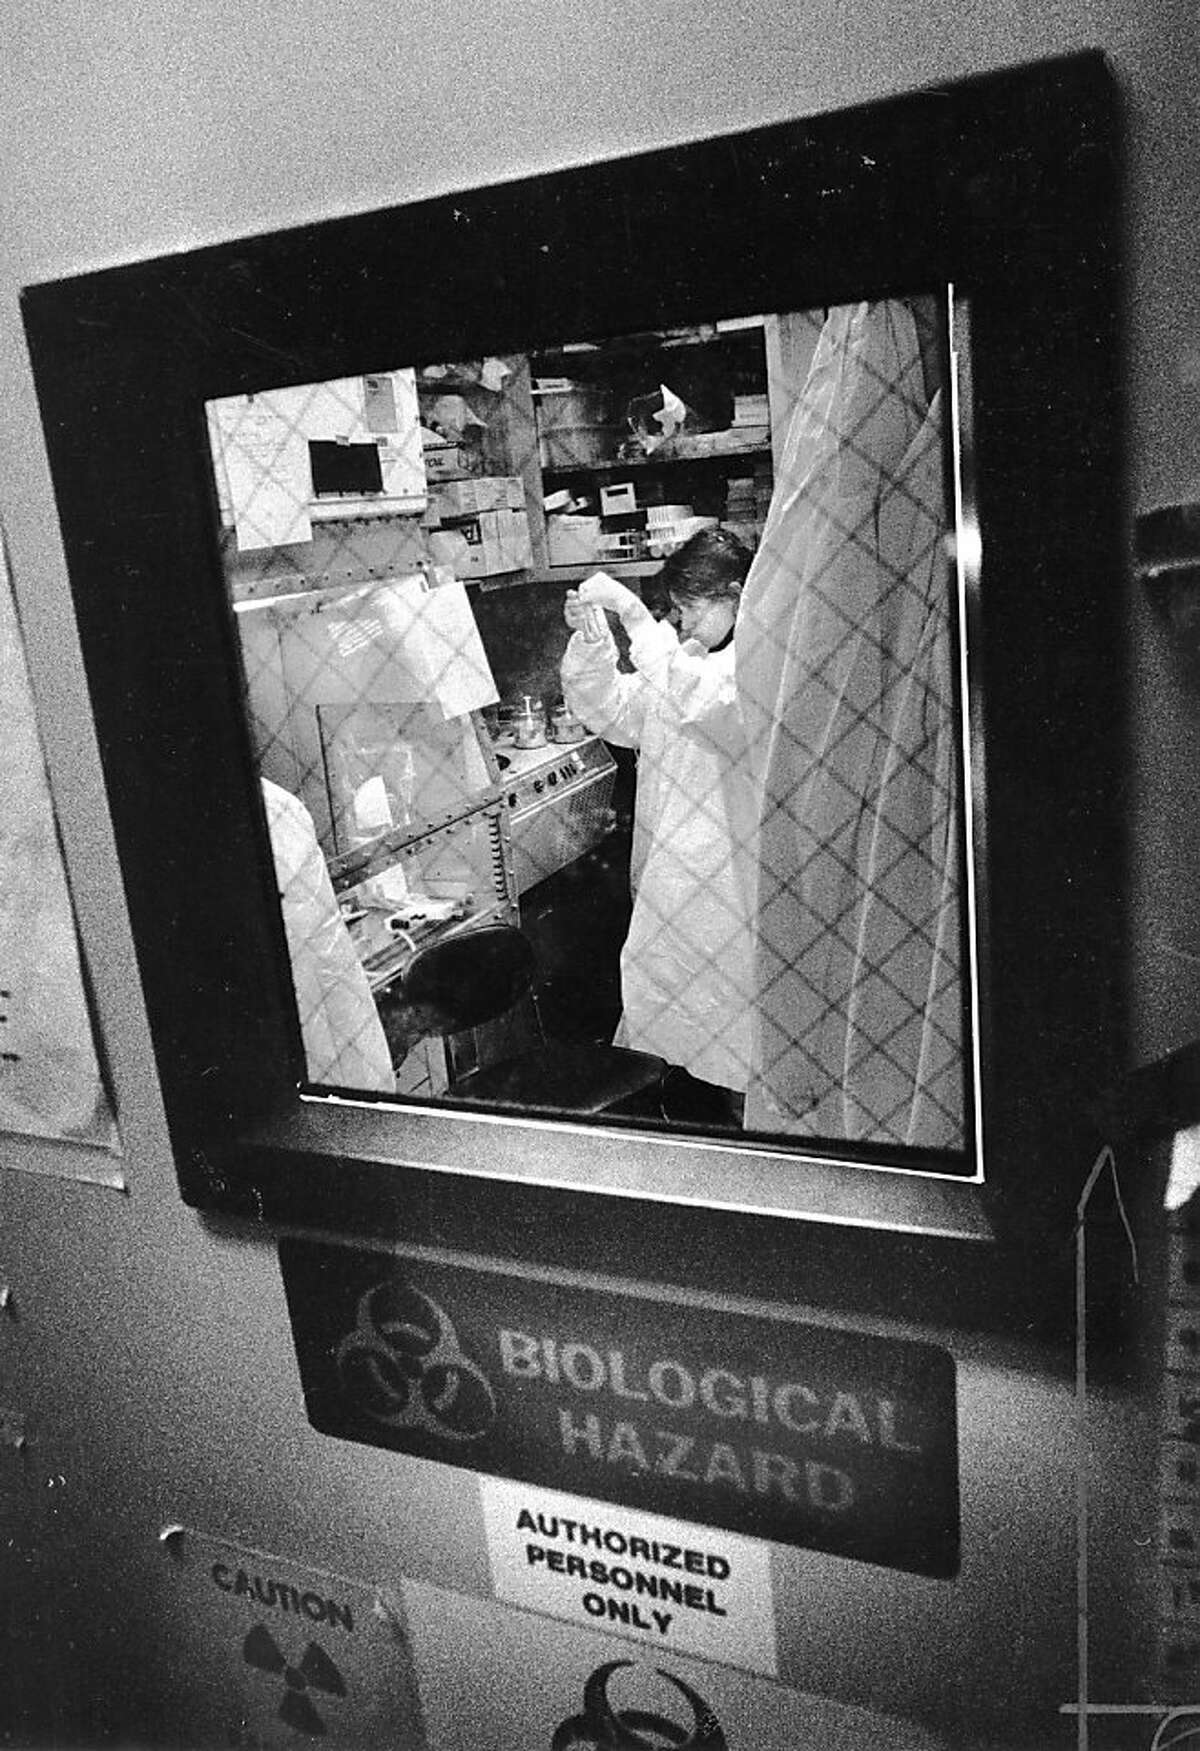 January 26th, 1989 - UCSF AIDS Immunobiology Research Institute. Isabelle Gaston, research assistant working on blood isolation within the Bio Hazards Facility.